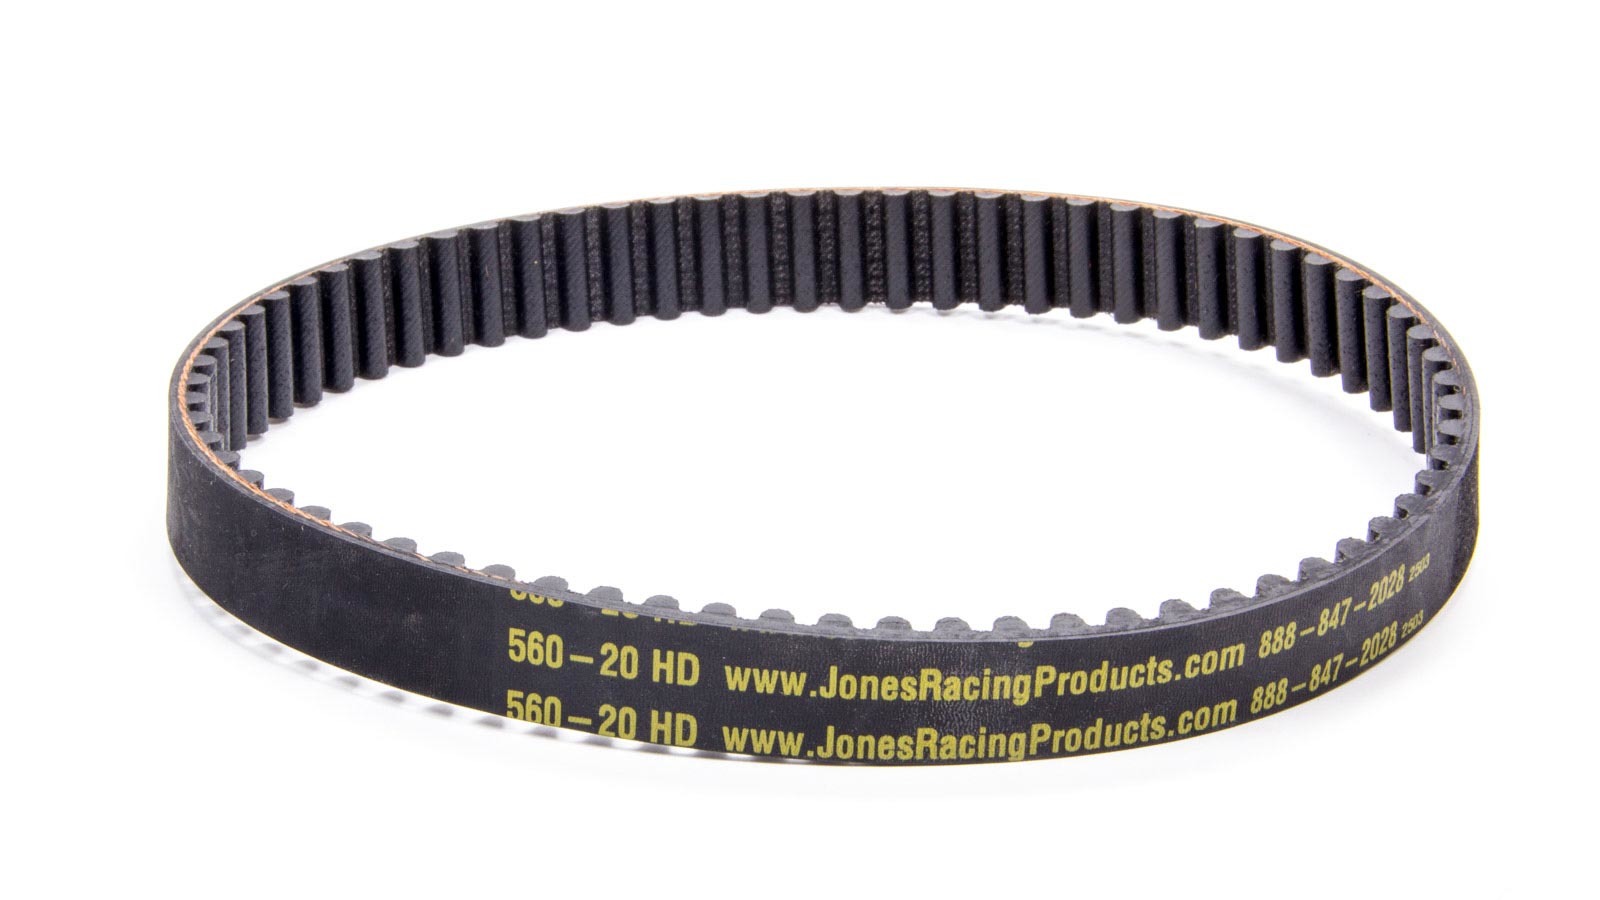 Jones Racing Products 576-20HD HTD Drive Belt, 22.680 in Long, 20 mm Wide, 8 mm Pitch, Each